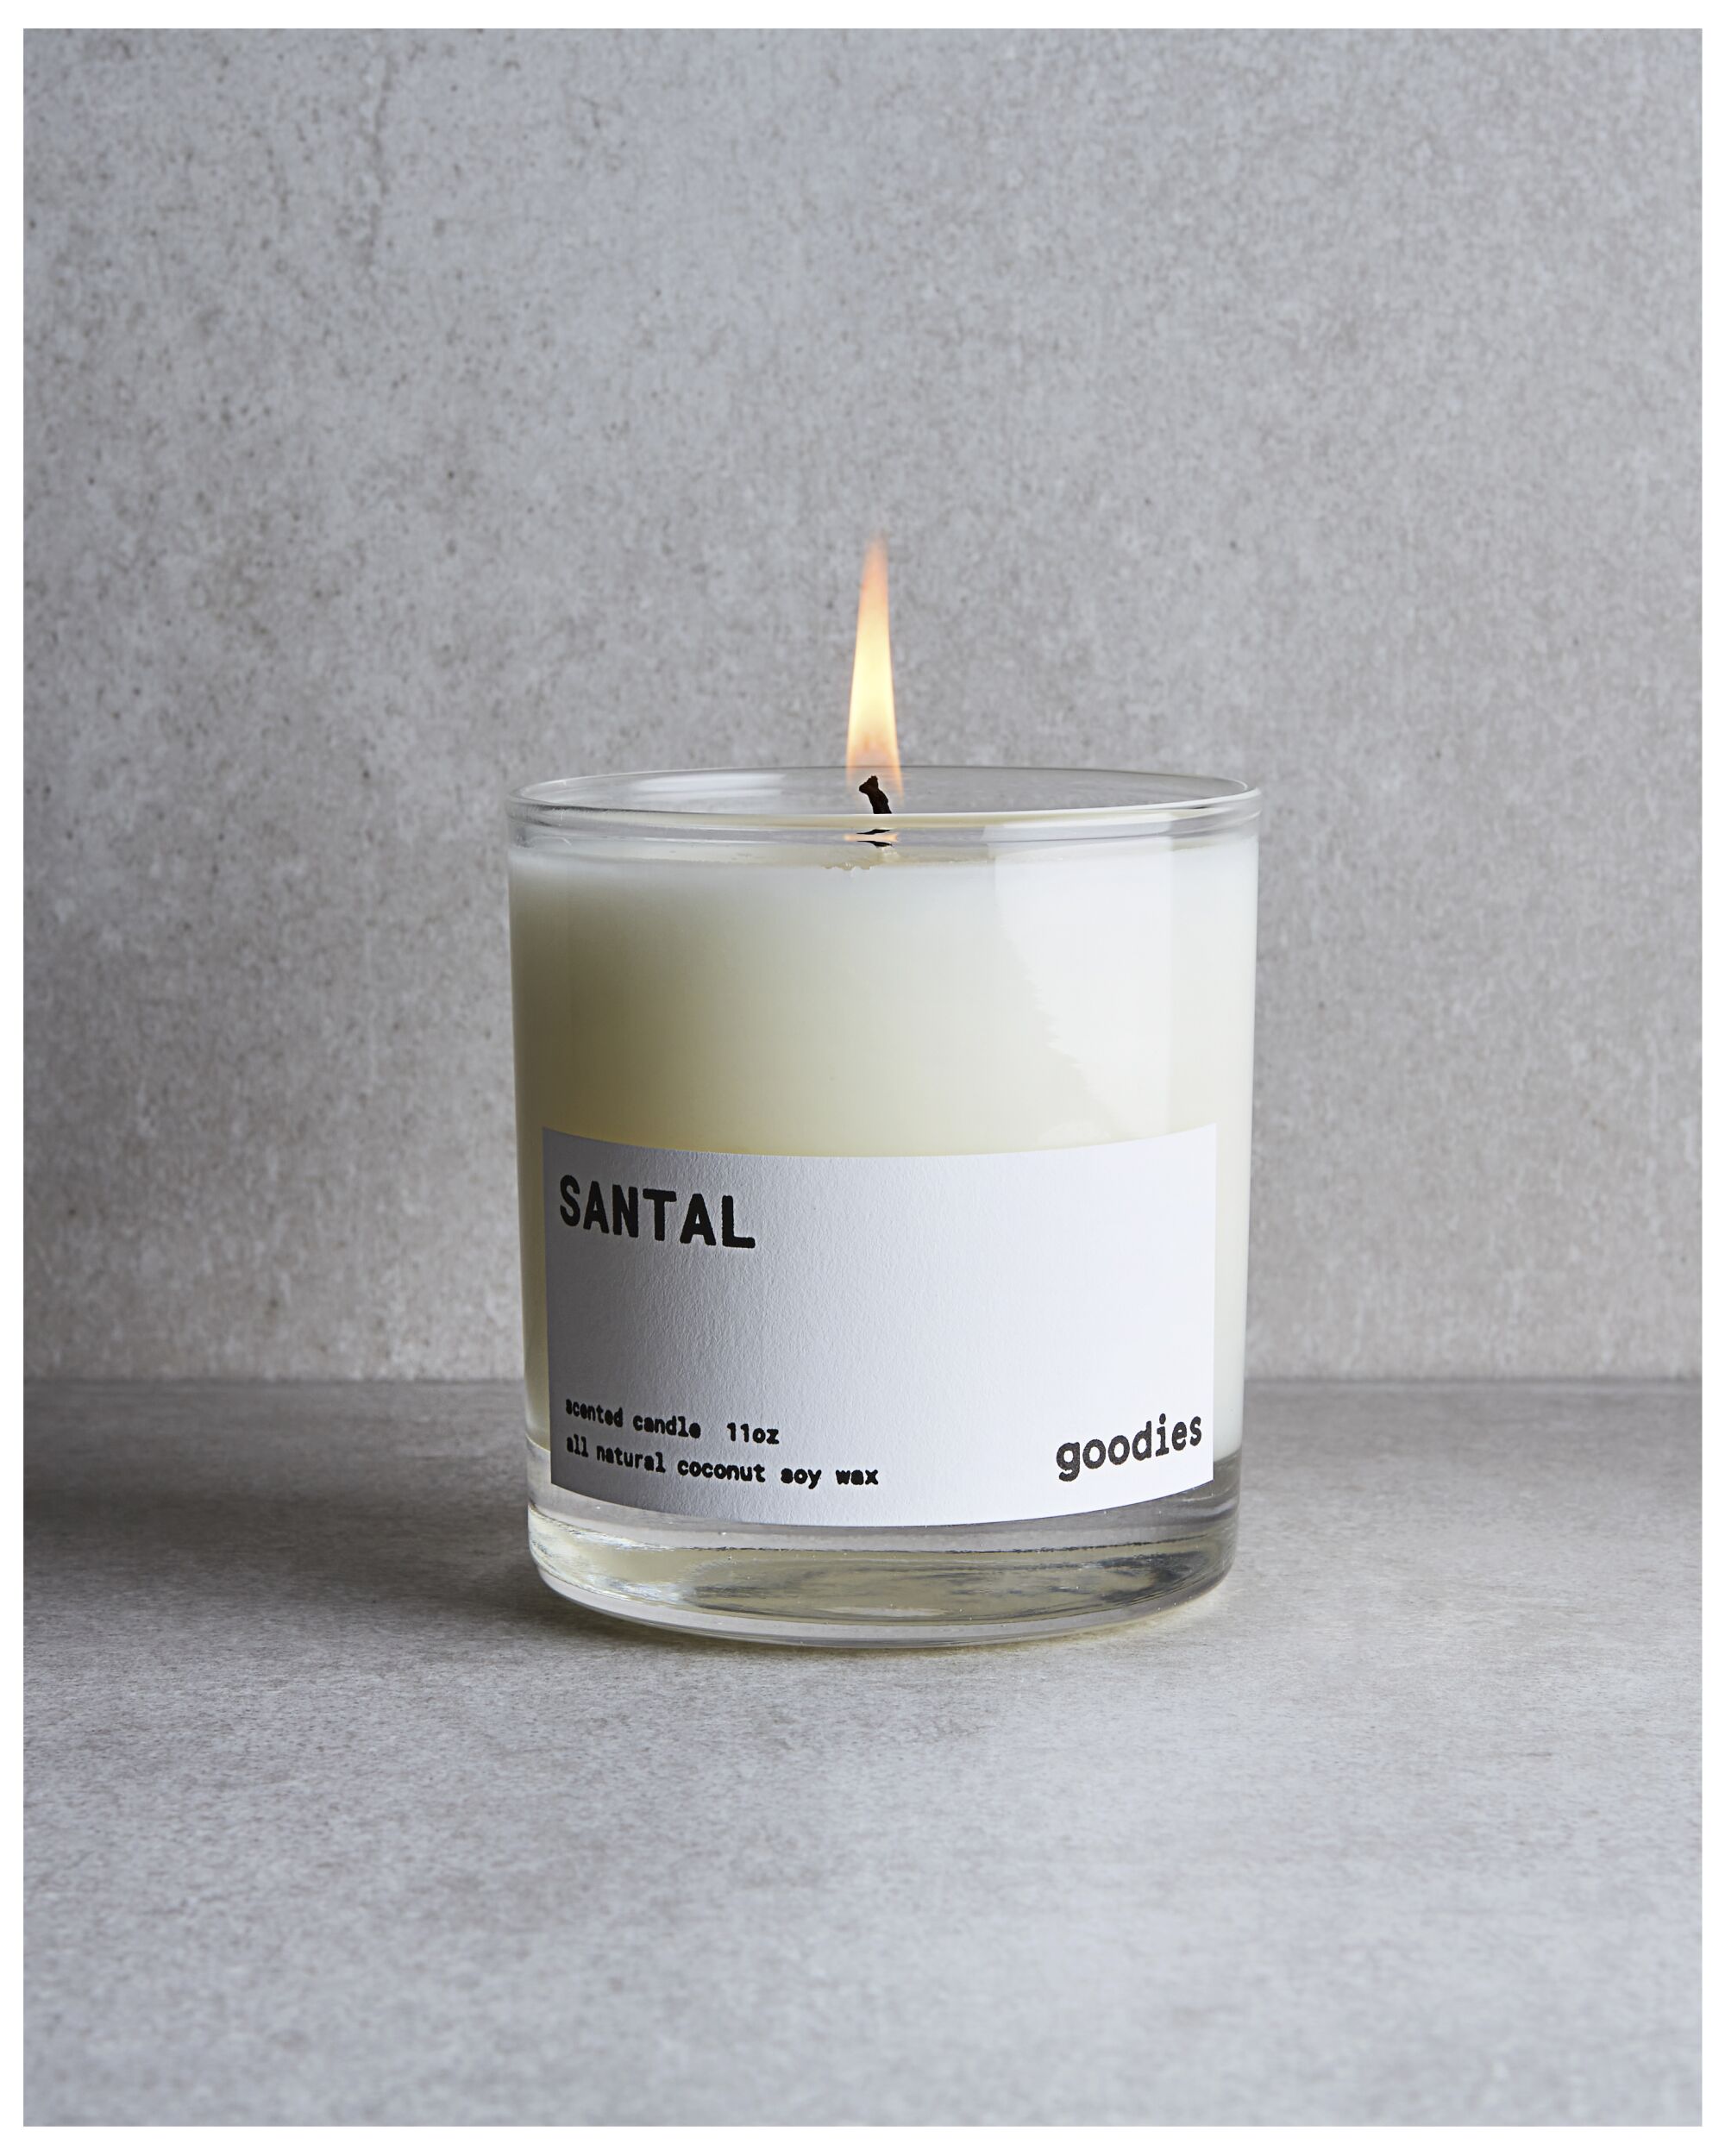 A Santal candle from Goodies